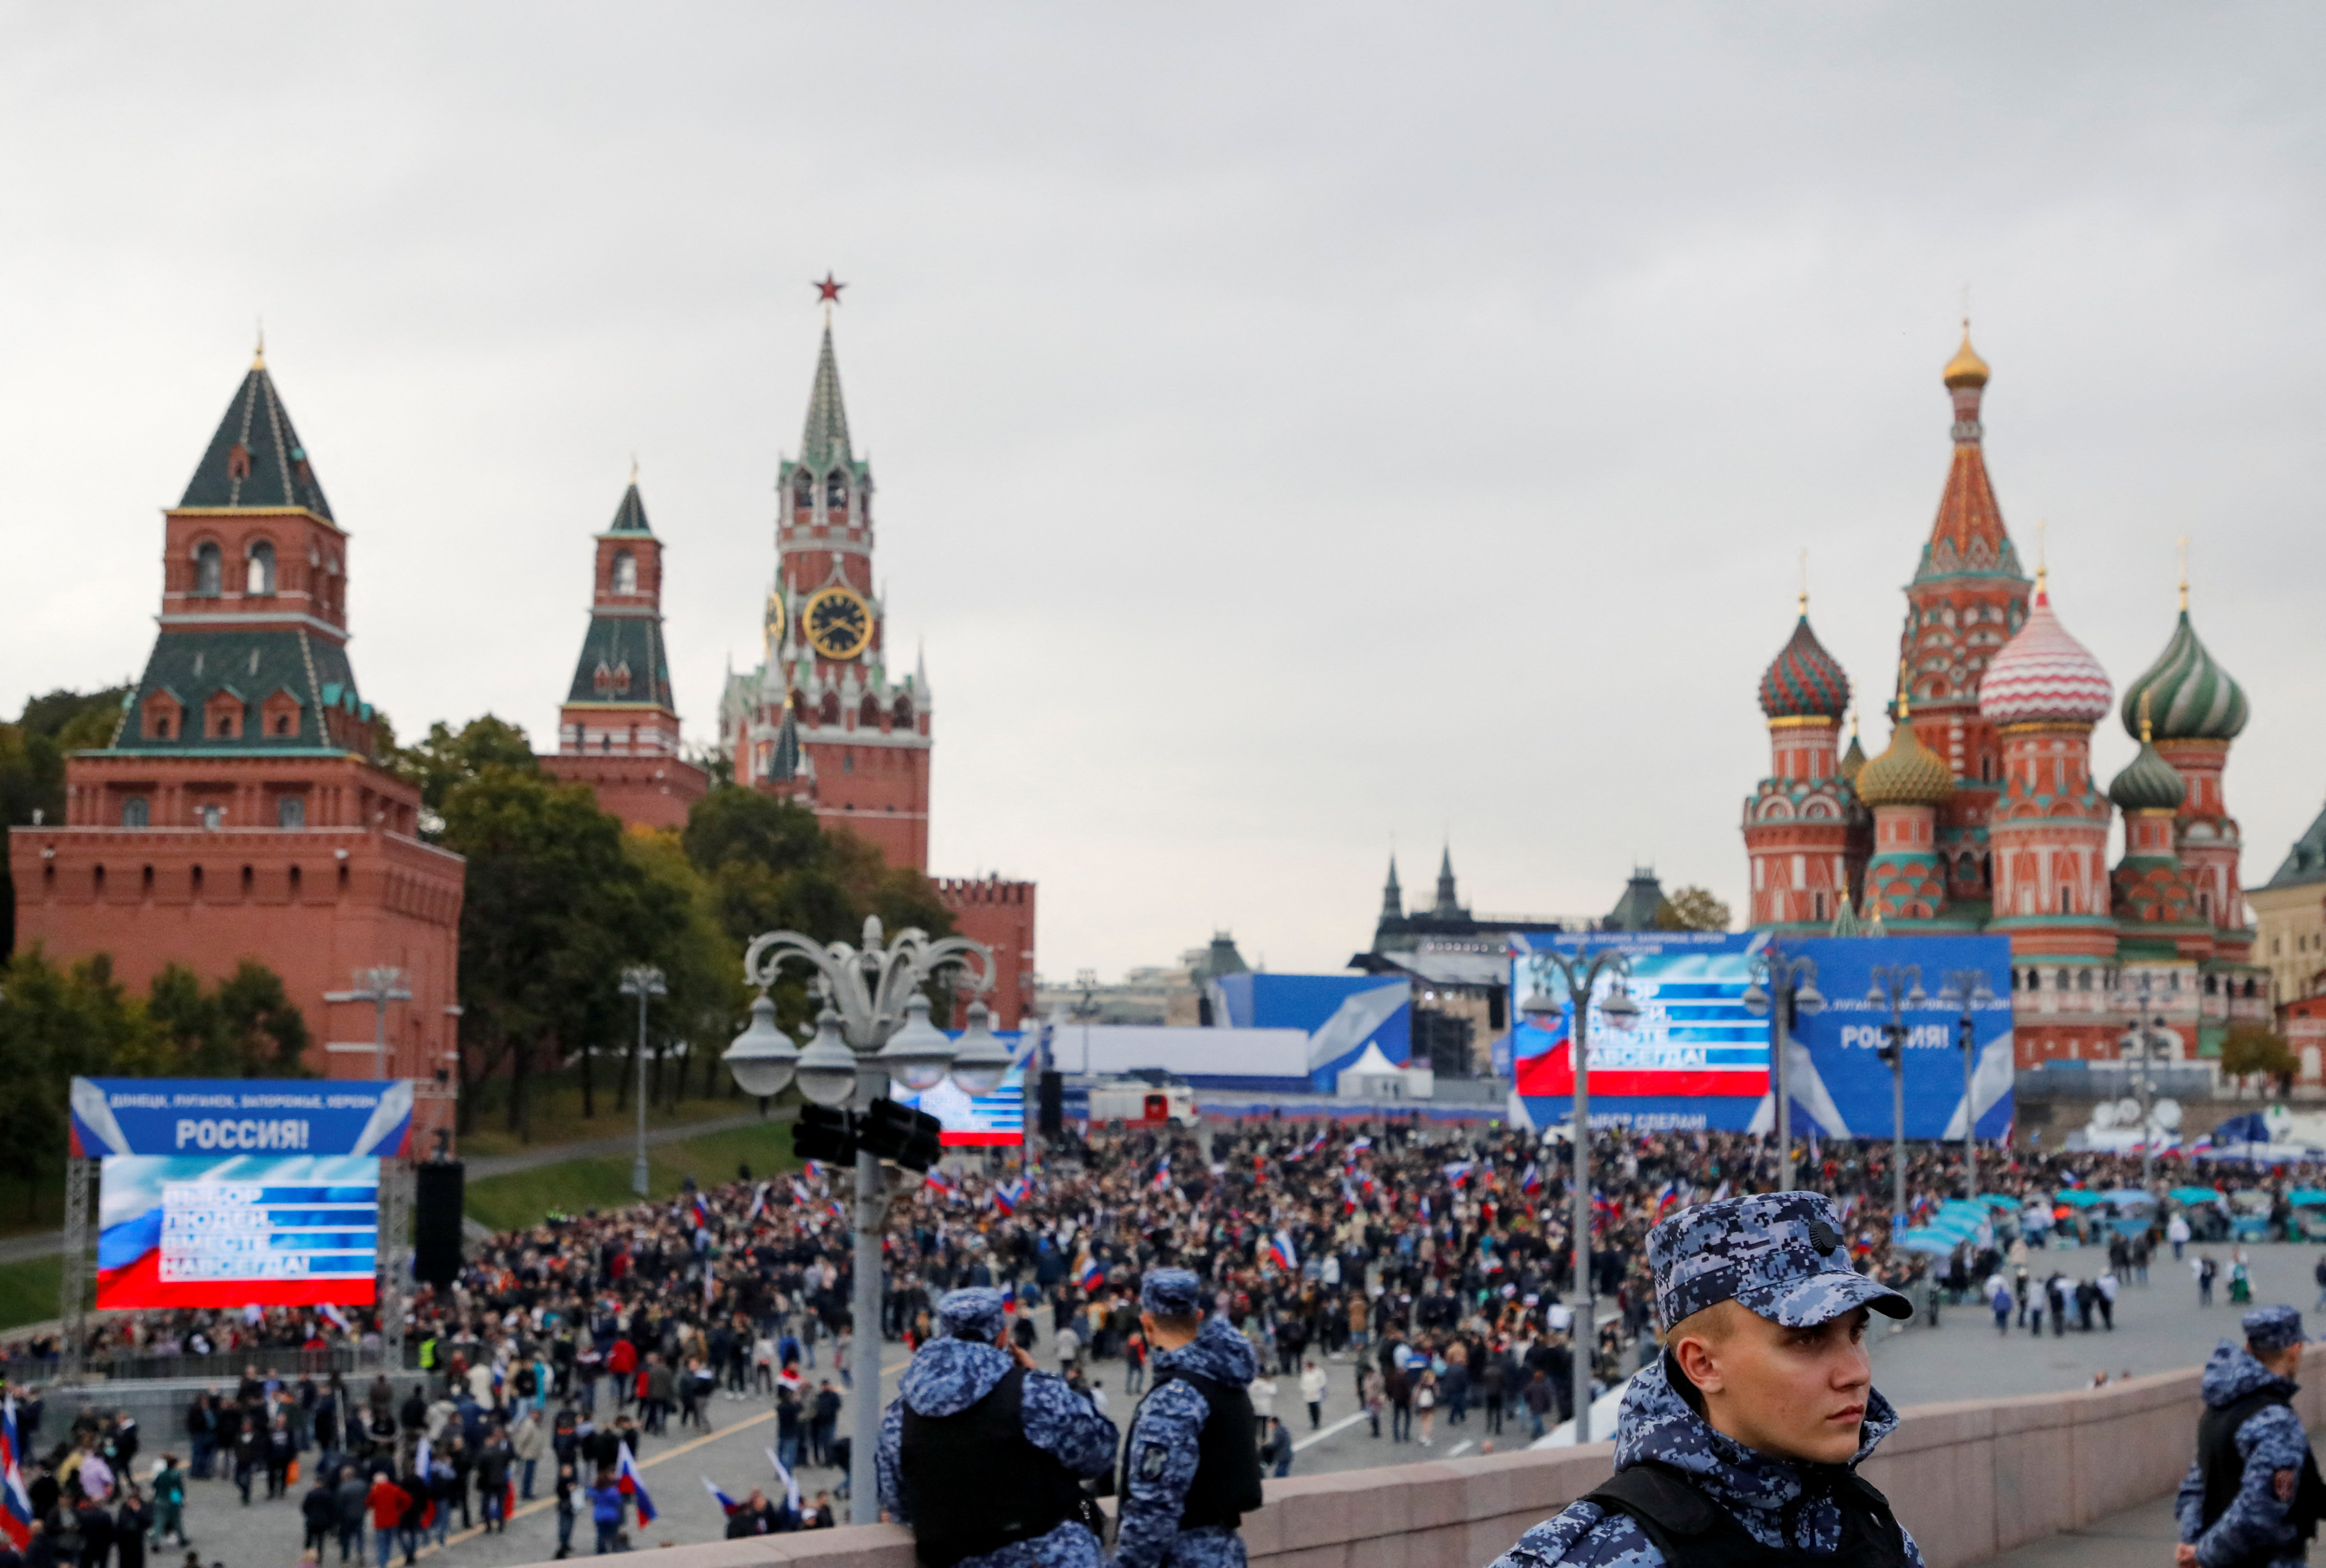 Events marking Russia's annexation of four Ukrainian territories held in Moscow